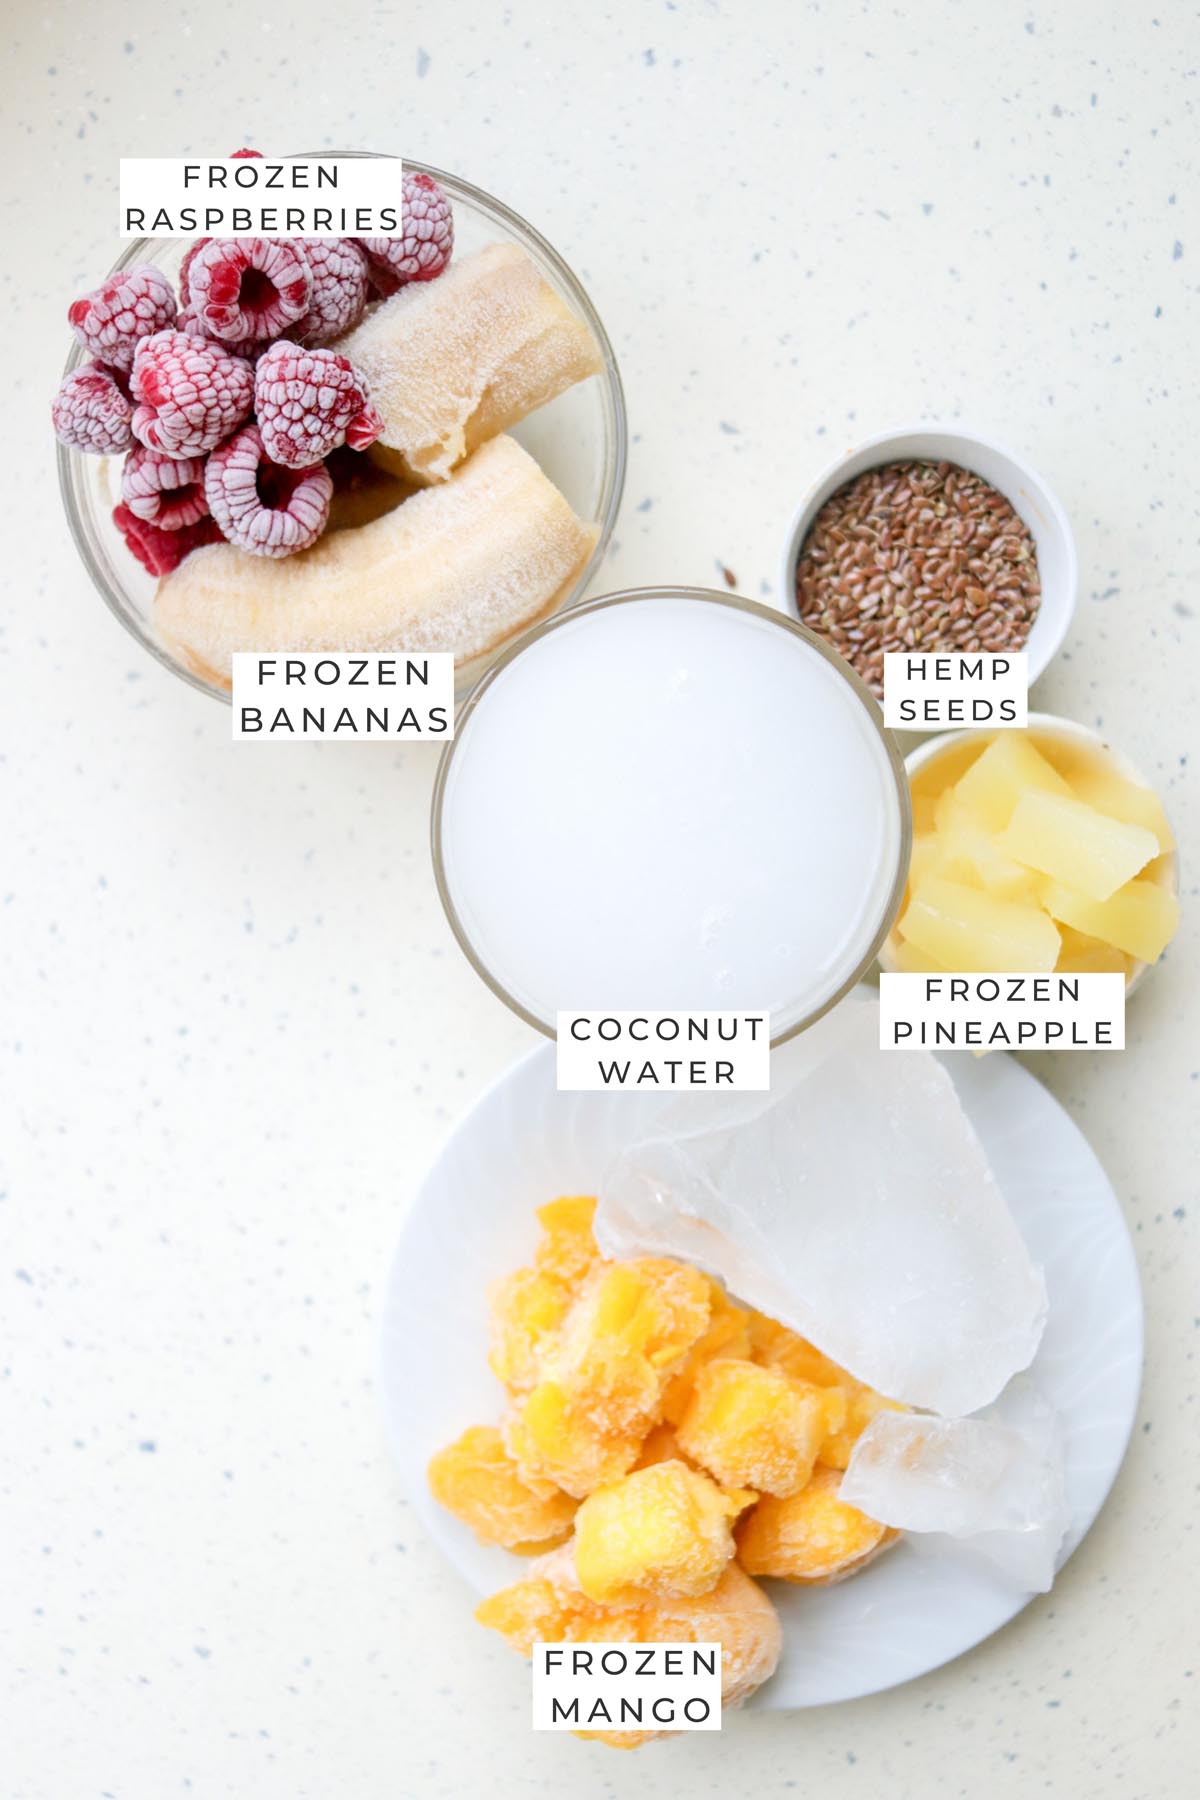 Labeled ingredients for the smoothie.